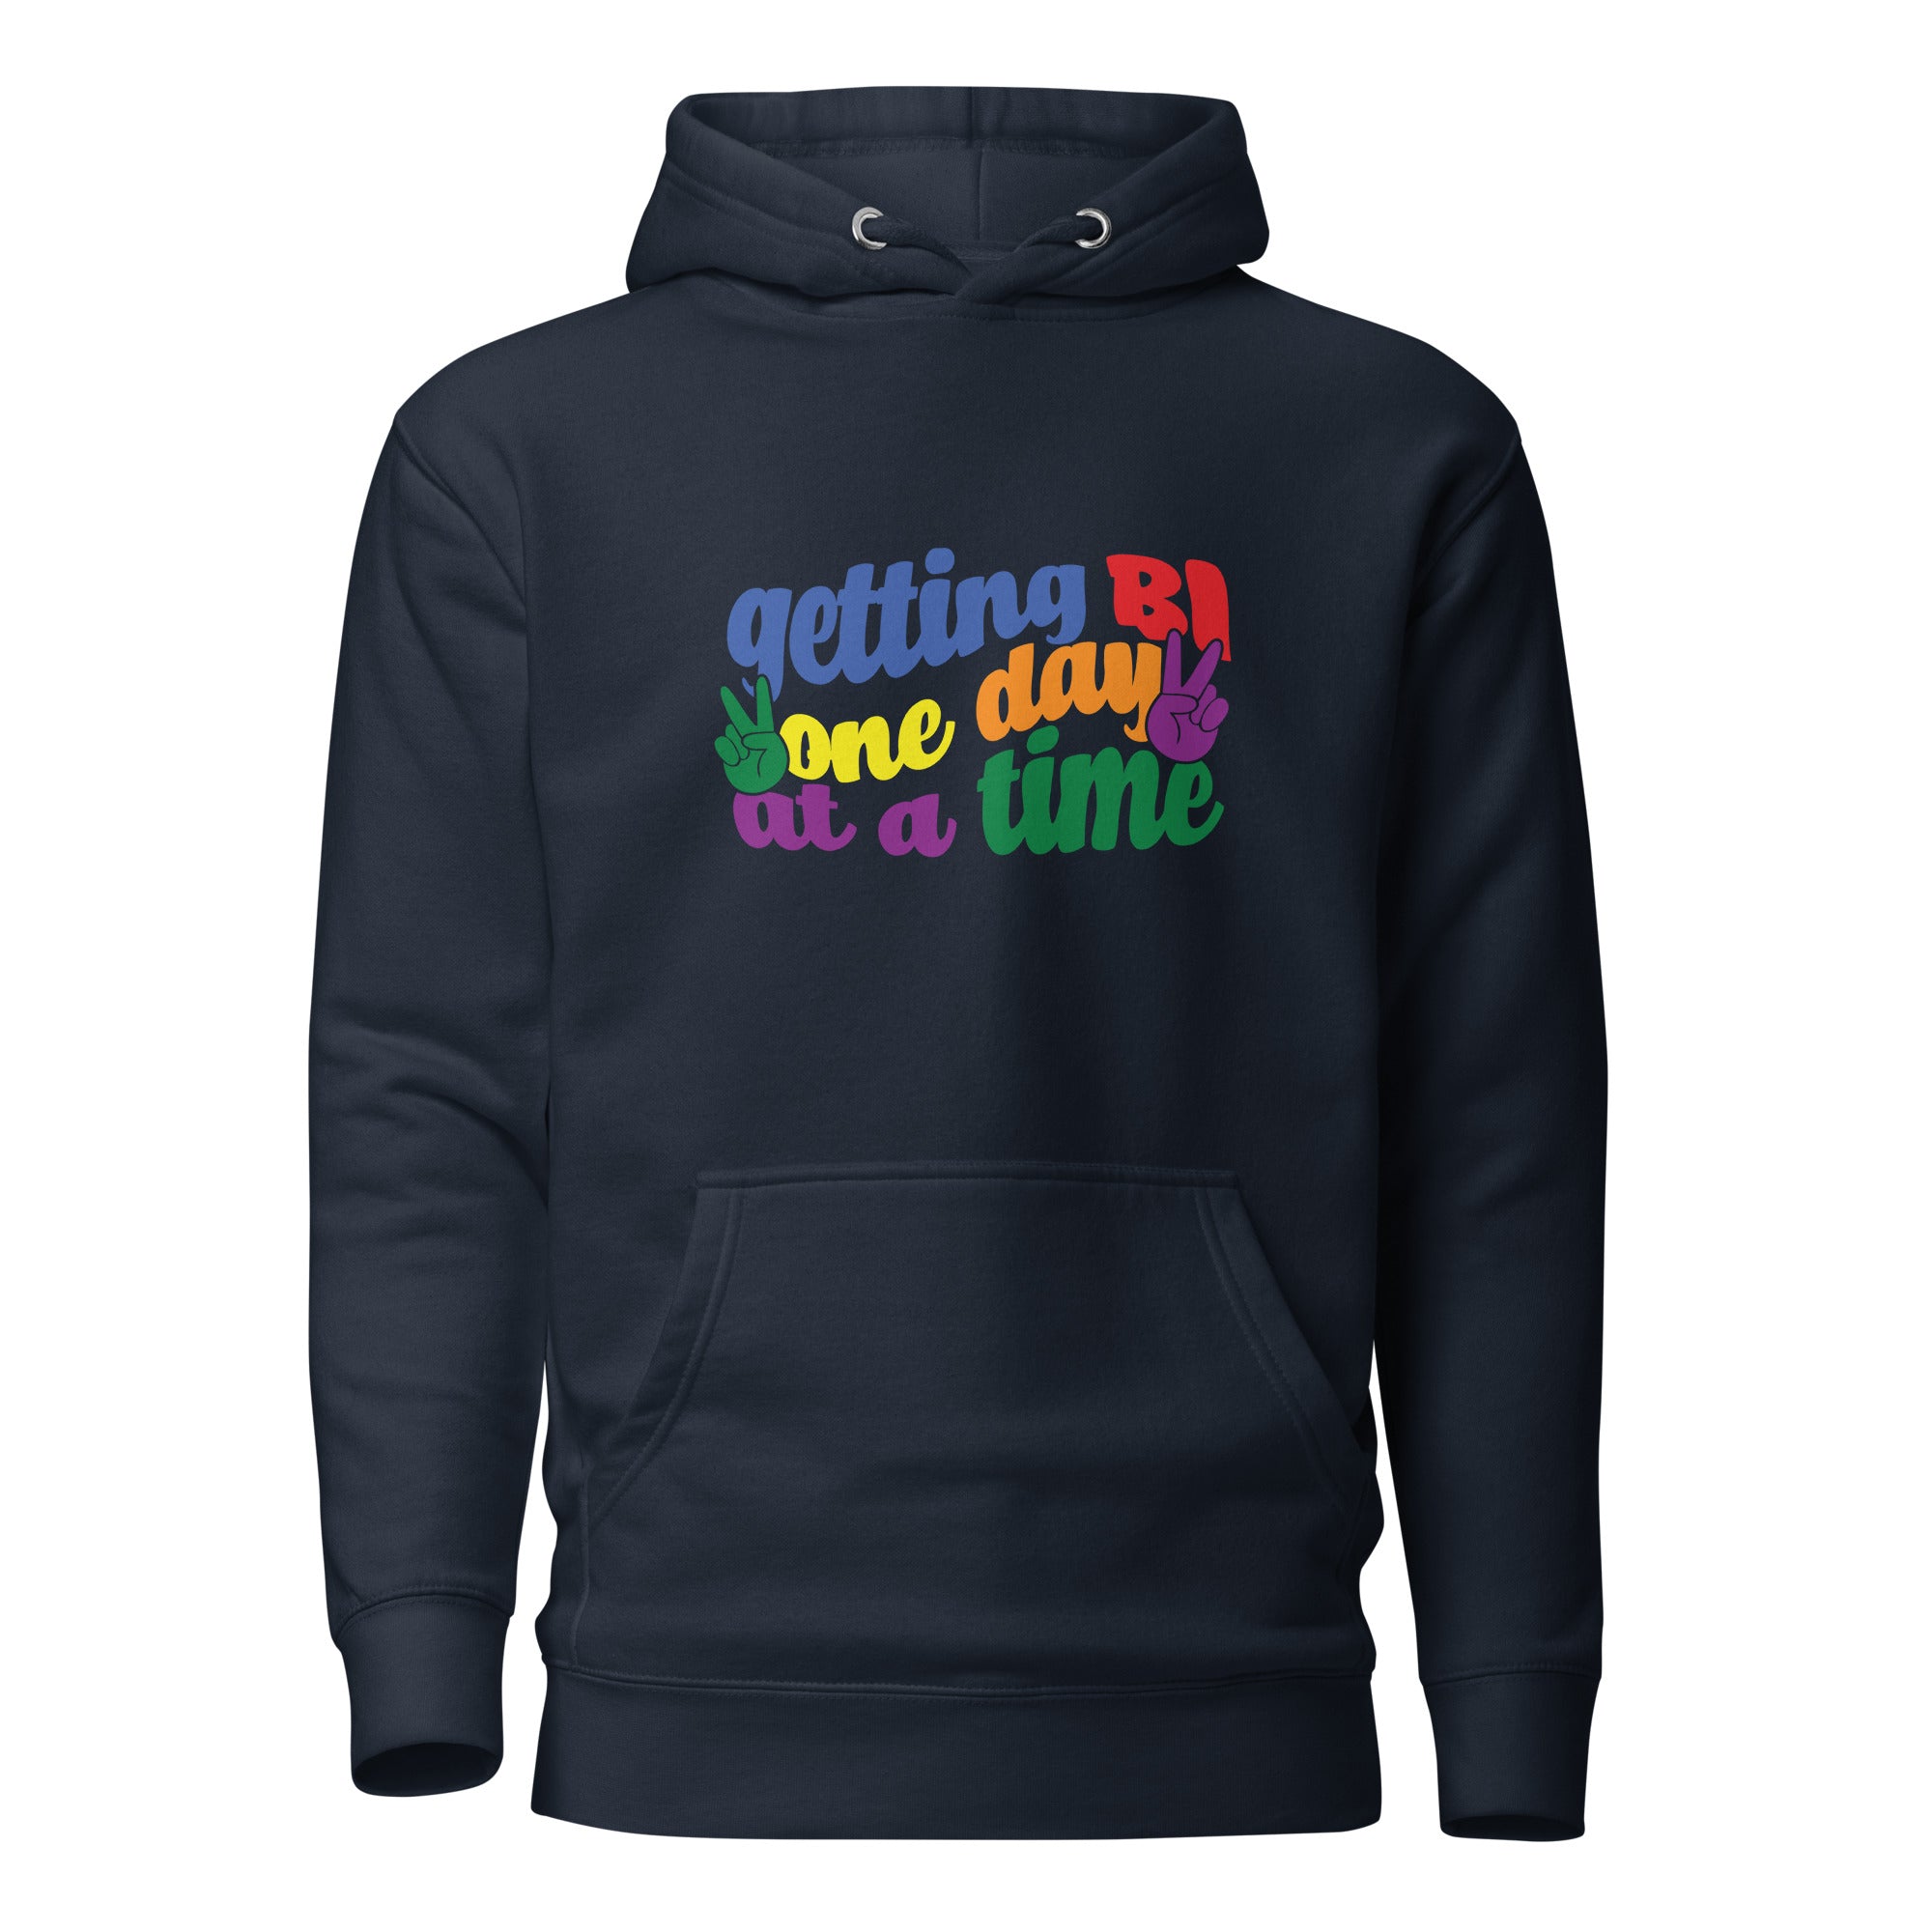 Unisex Hoodie- Getting Bi one day at a time